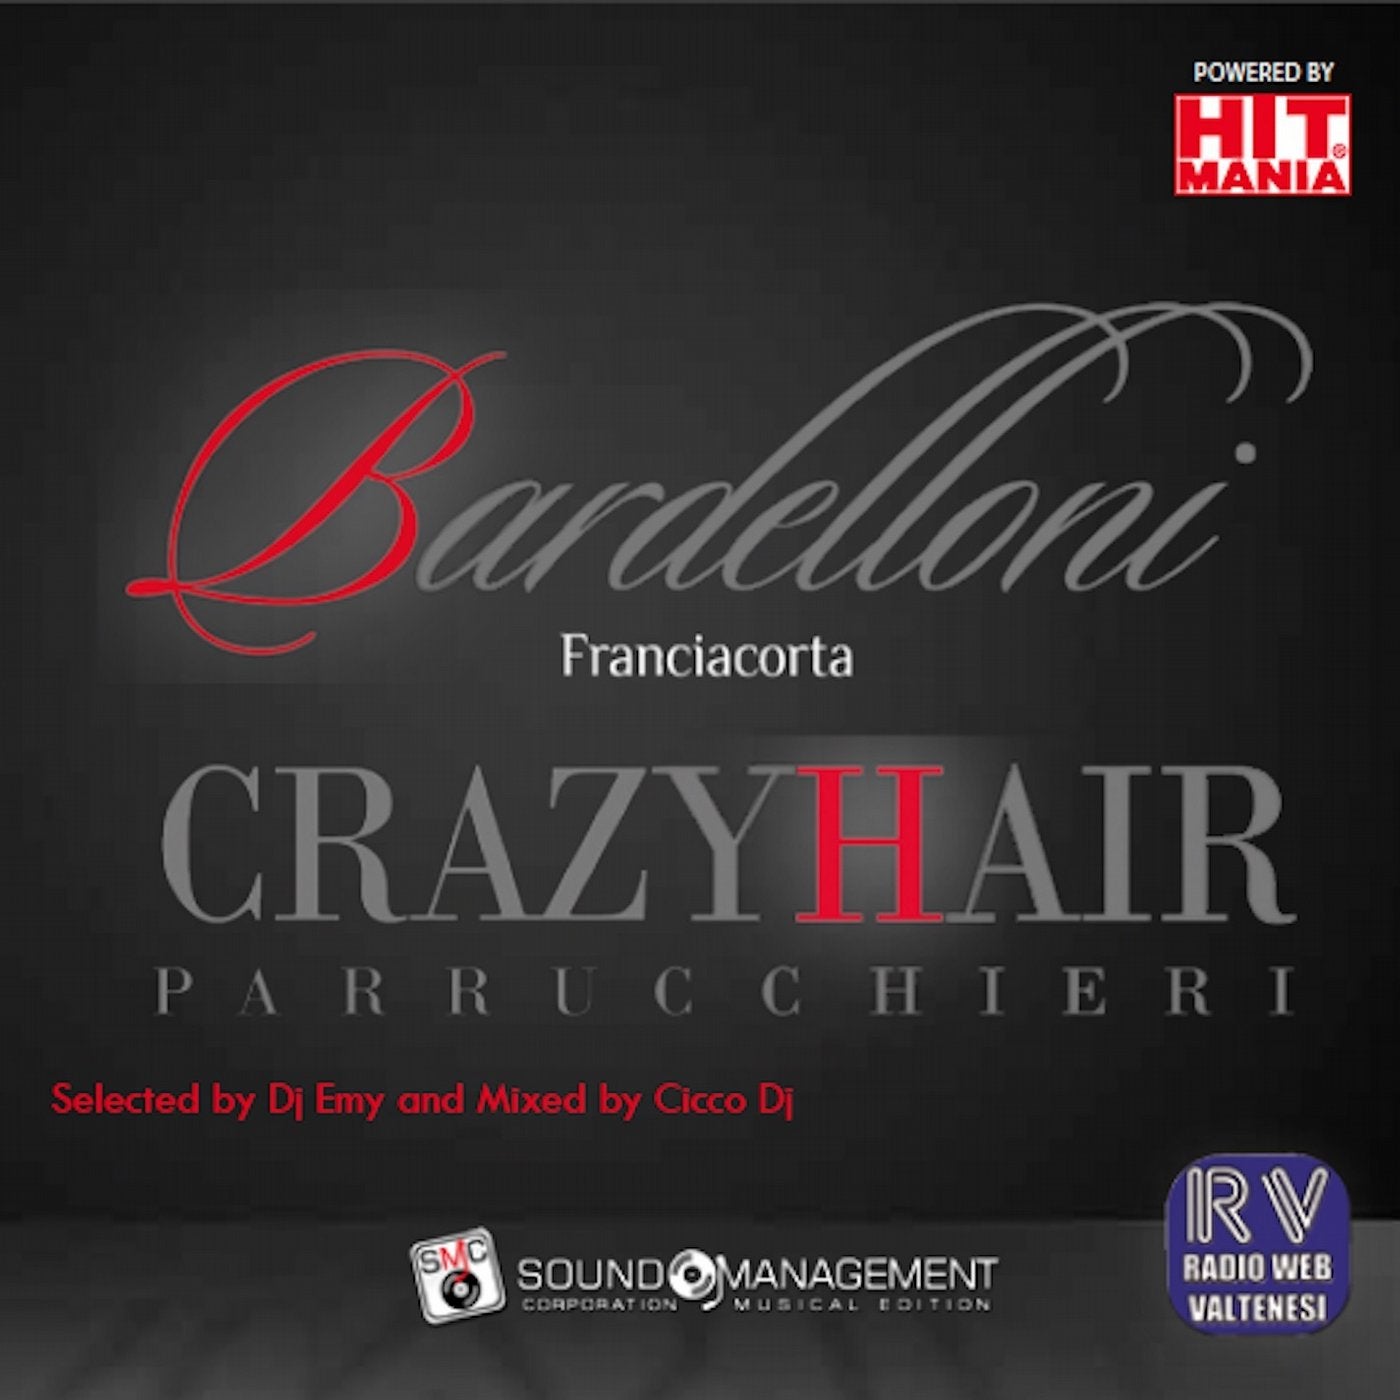 Bardelloni Crazy Hair Music Compilation